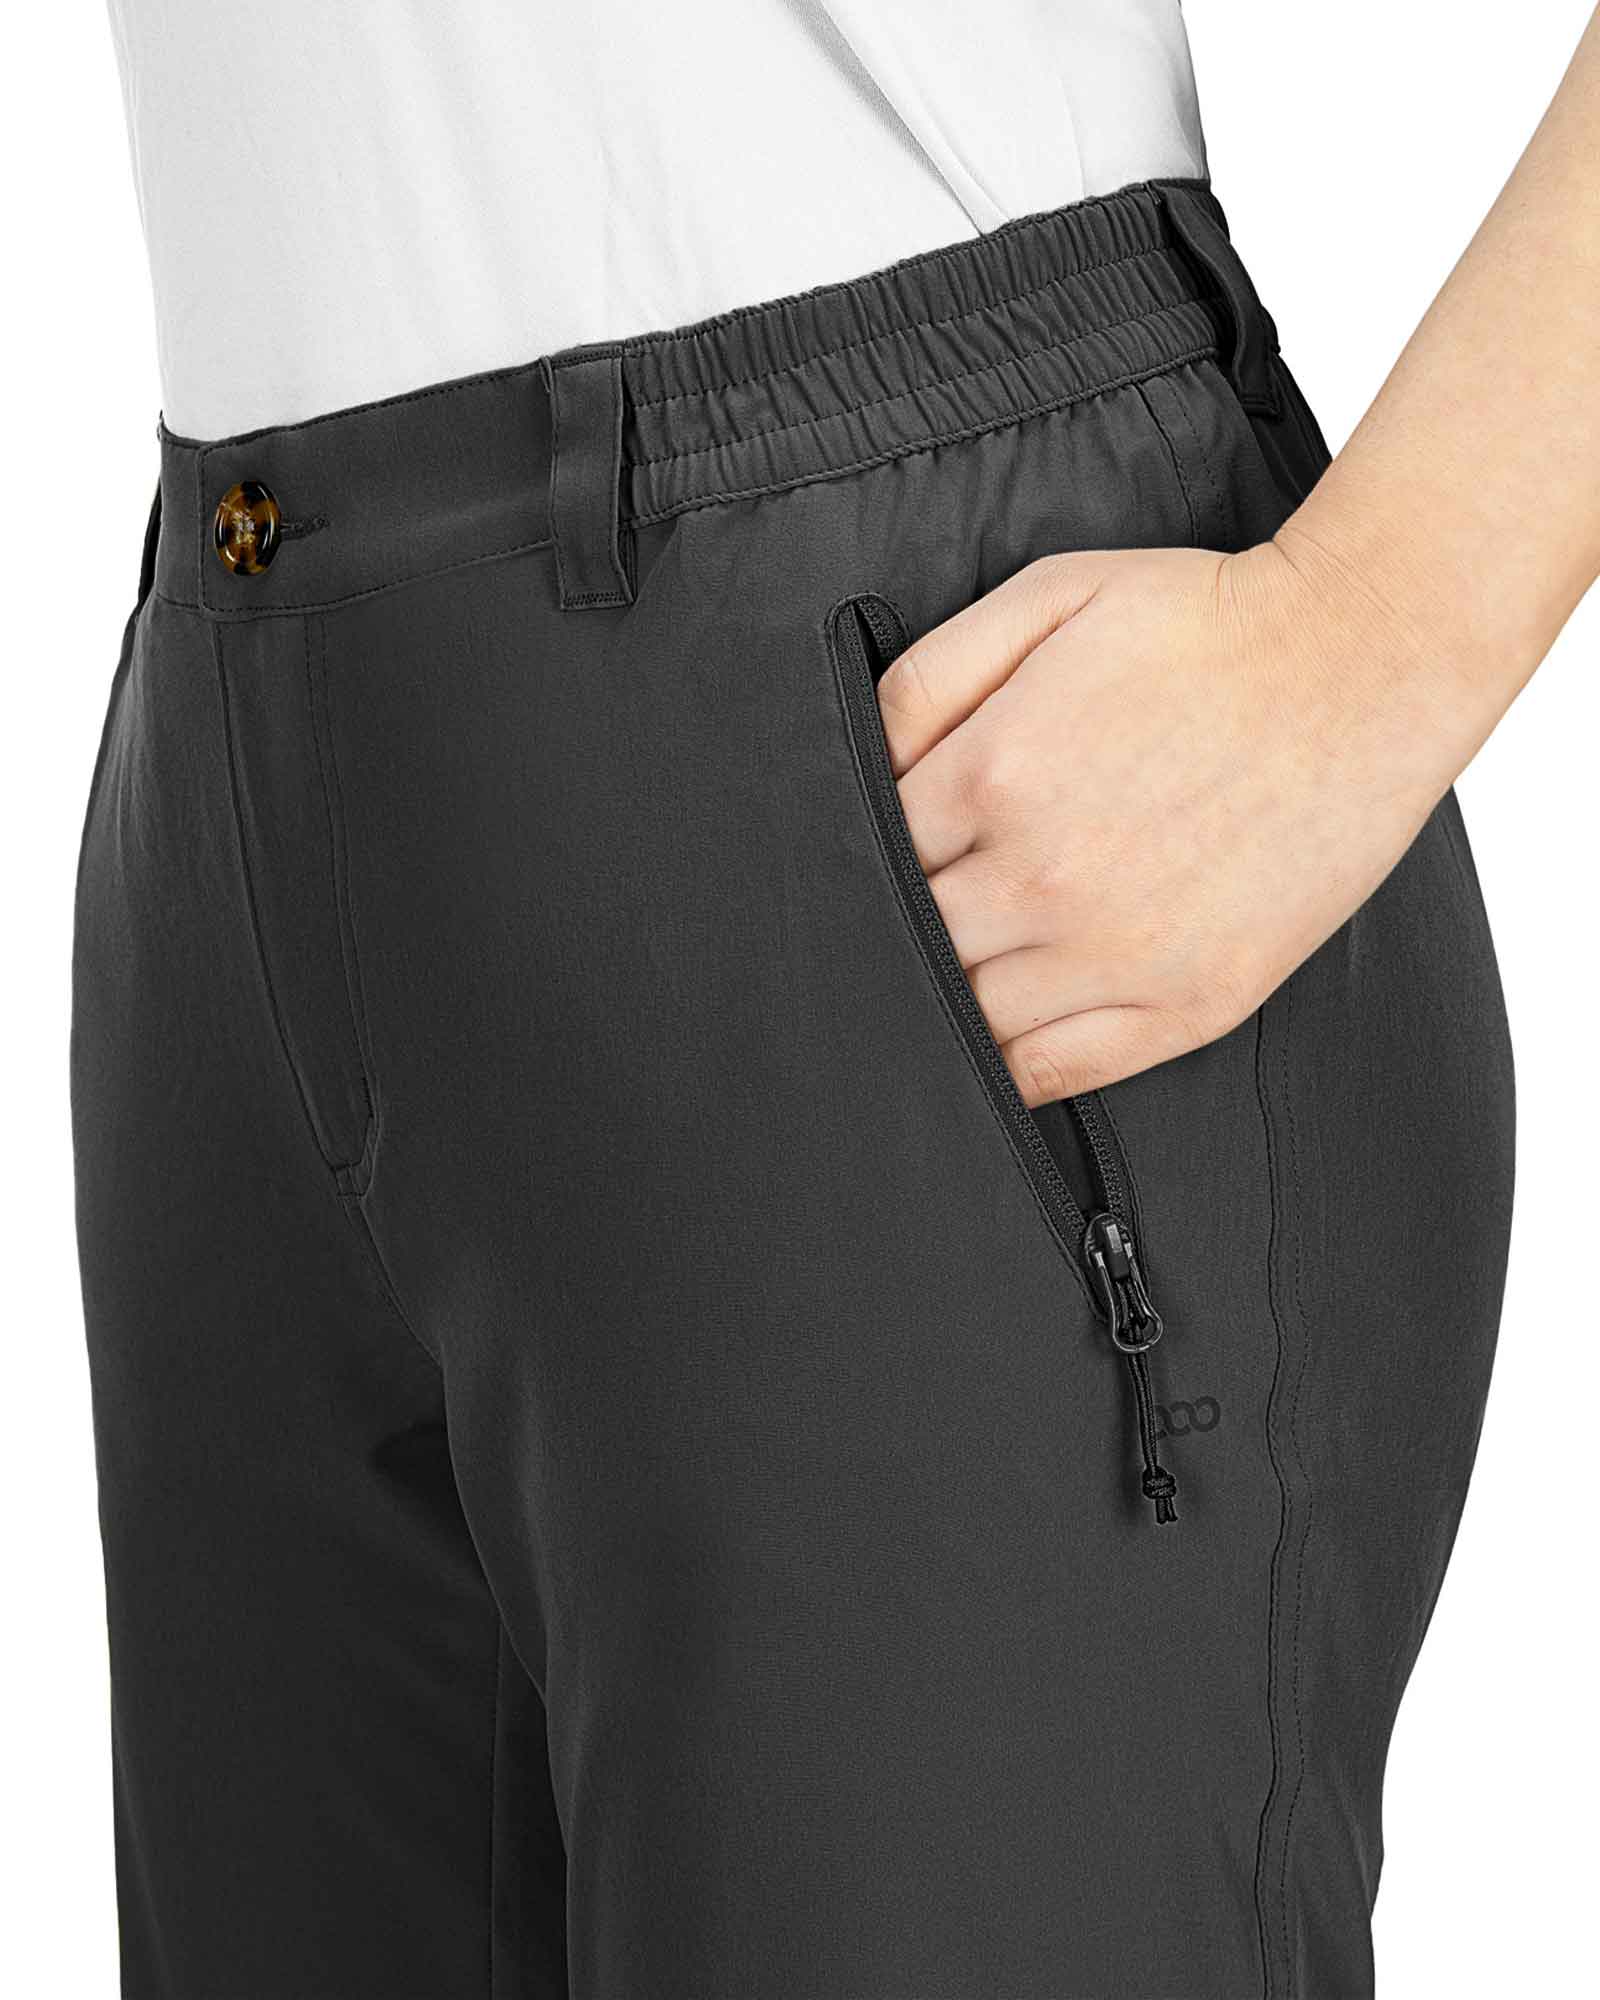 Zquehuo Women Capris High Waist Trousers Comfortable with Pockets